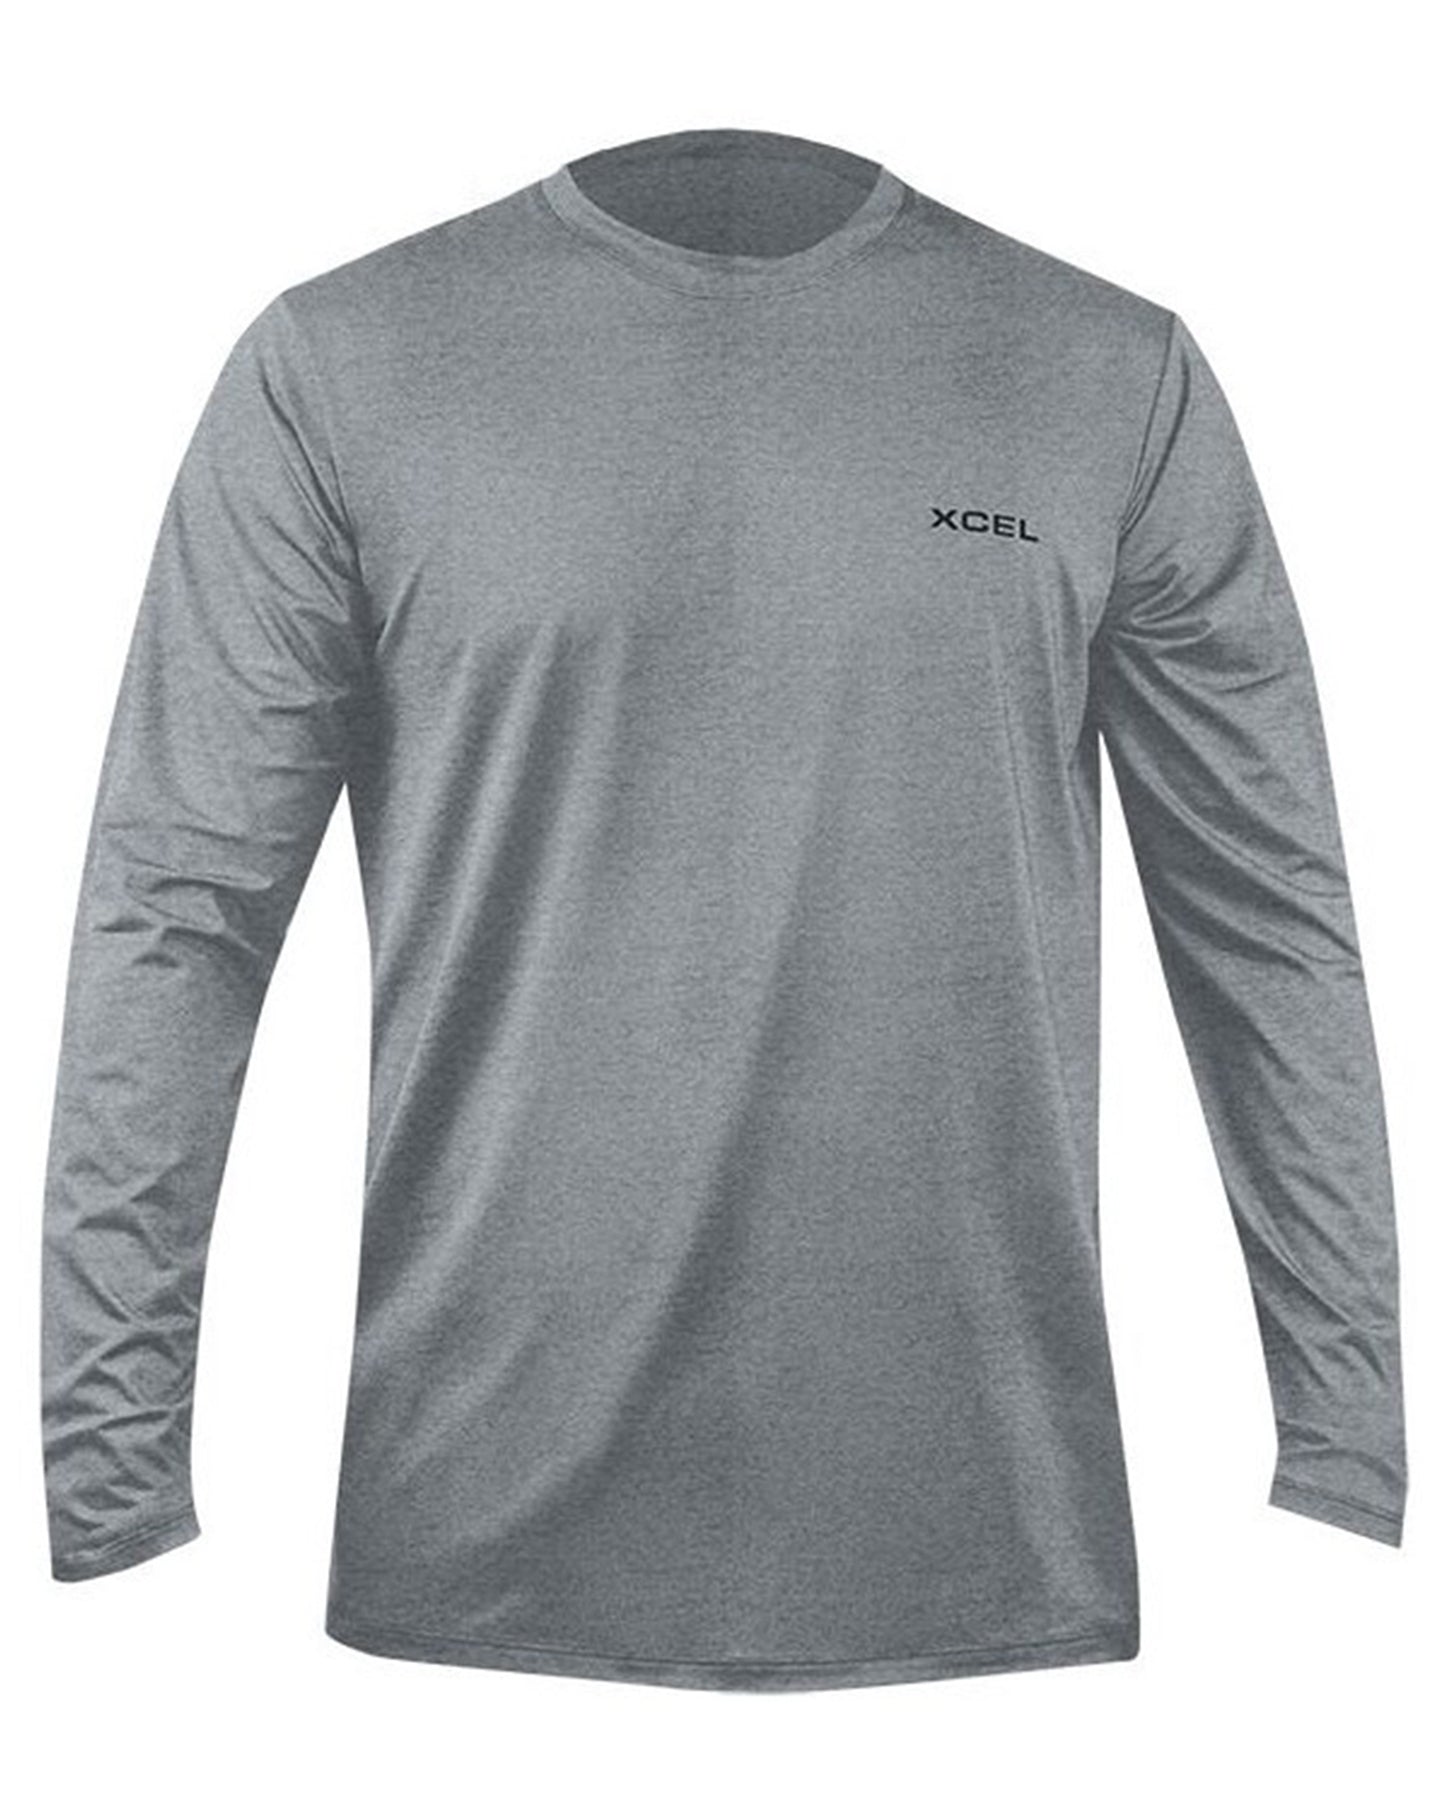 XCEL PREMIUM STRETCH LONG SLEEVE UV SHIRT - Board Store XcelWetsuits  